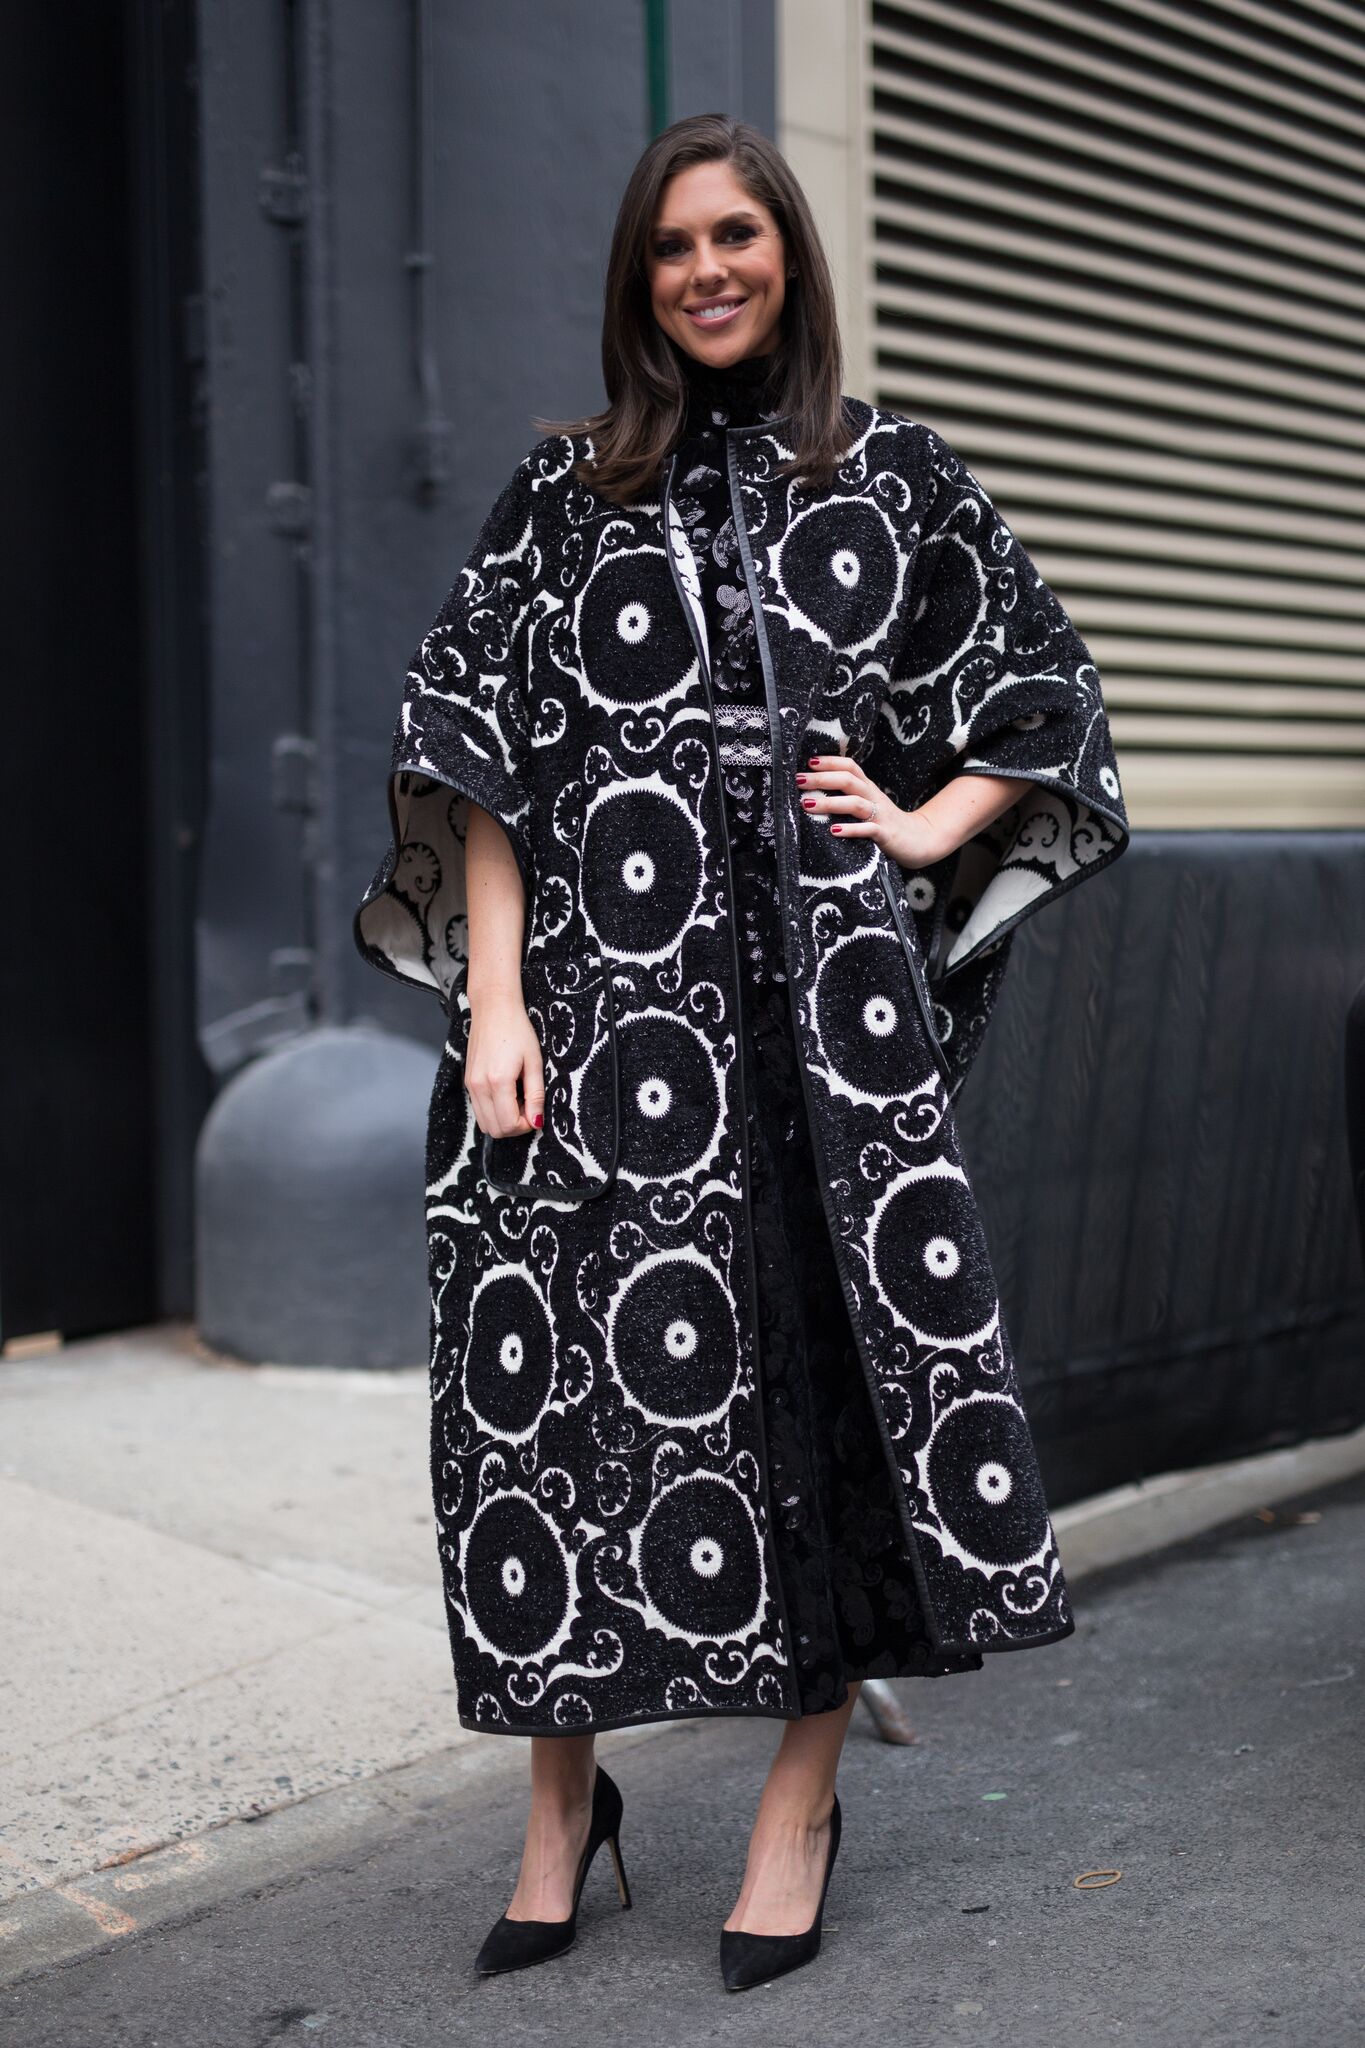 Abby Huntsman is seen attending Vivienne Tam during New York Fashion Week while wearing black and white circle design coat | Getty Images